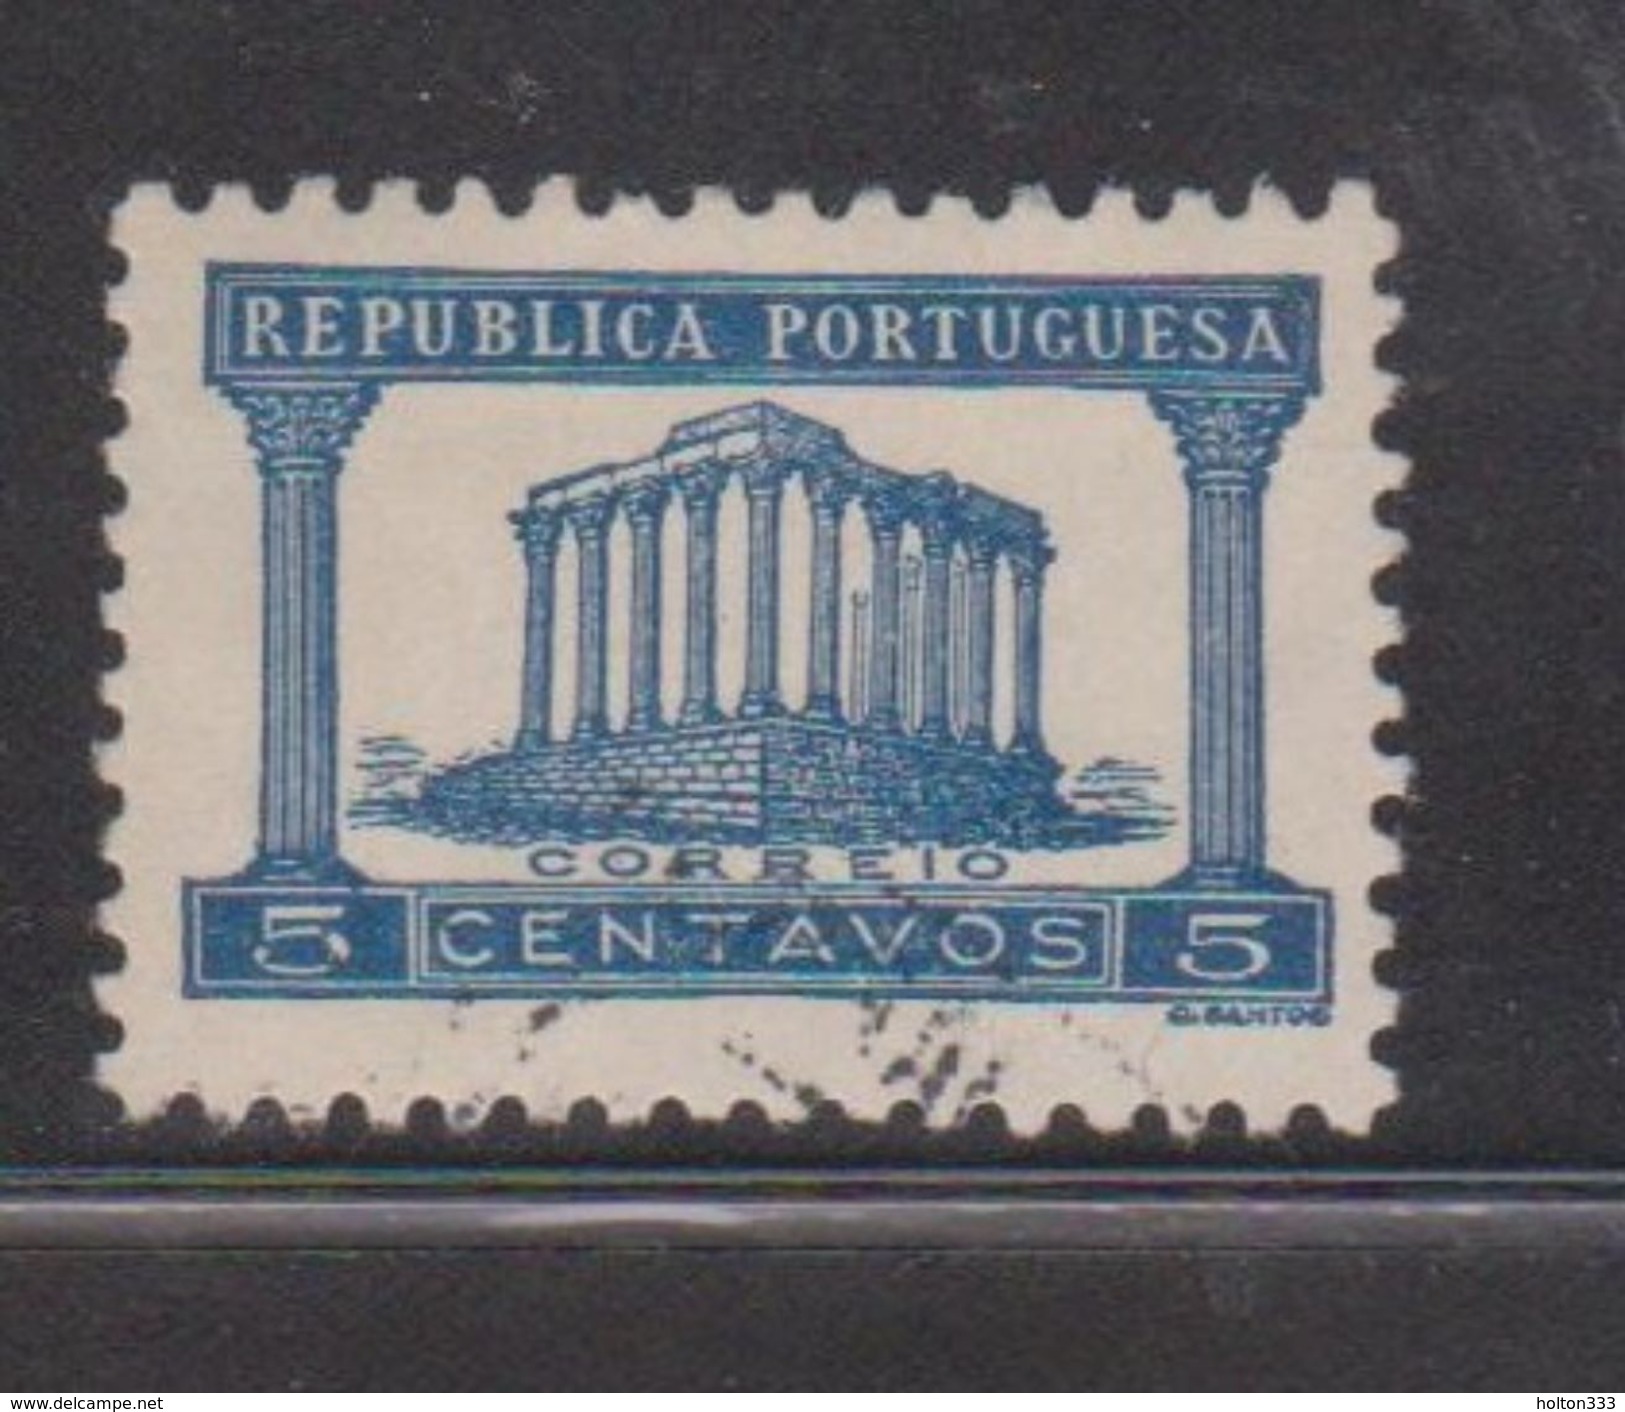 PORTUGAL Scott # 562 Used - Roman Building - Used Stamps